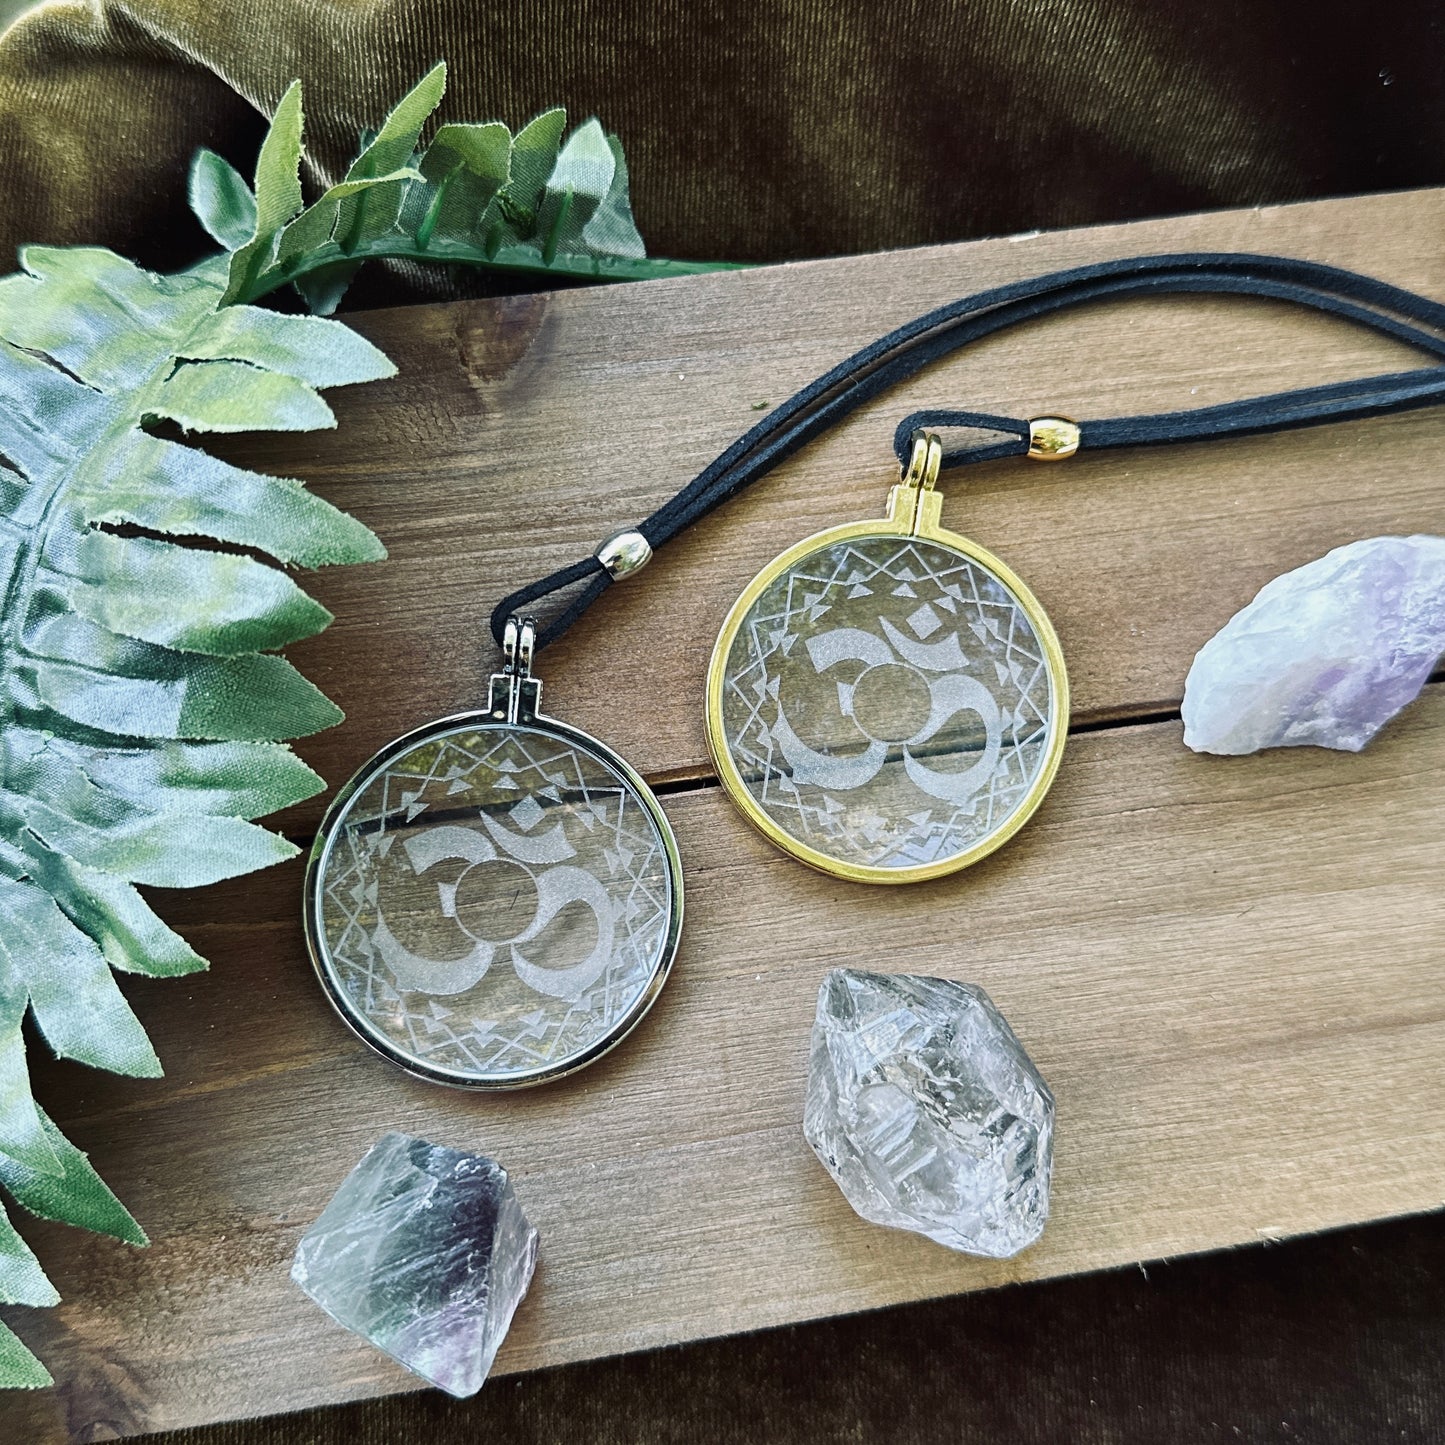 Om Yoga Necklace, Solar Lighter, Magnifying Glass Necklace, Sustainable Jewelry, Cannabis Accessory